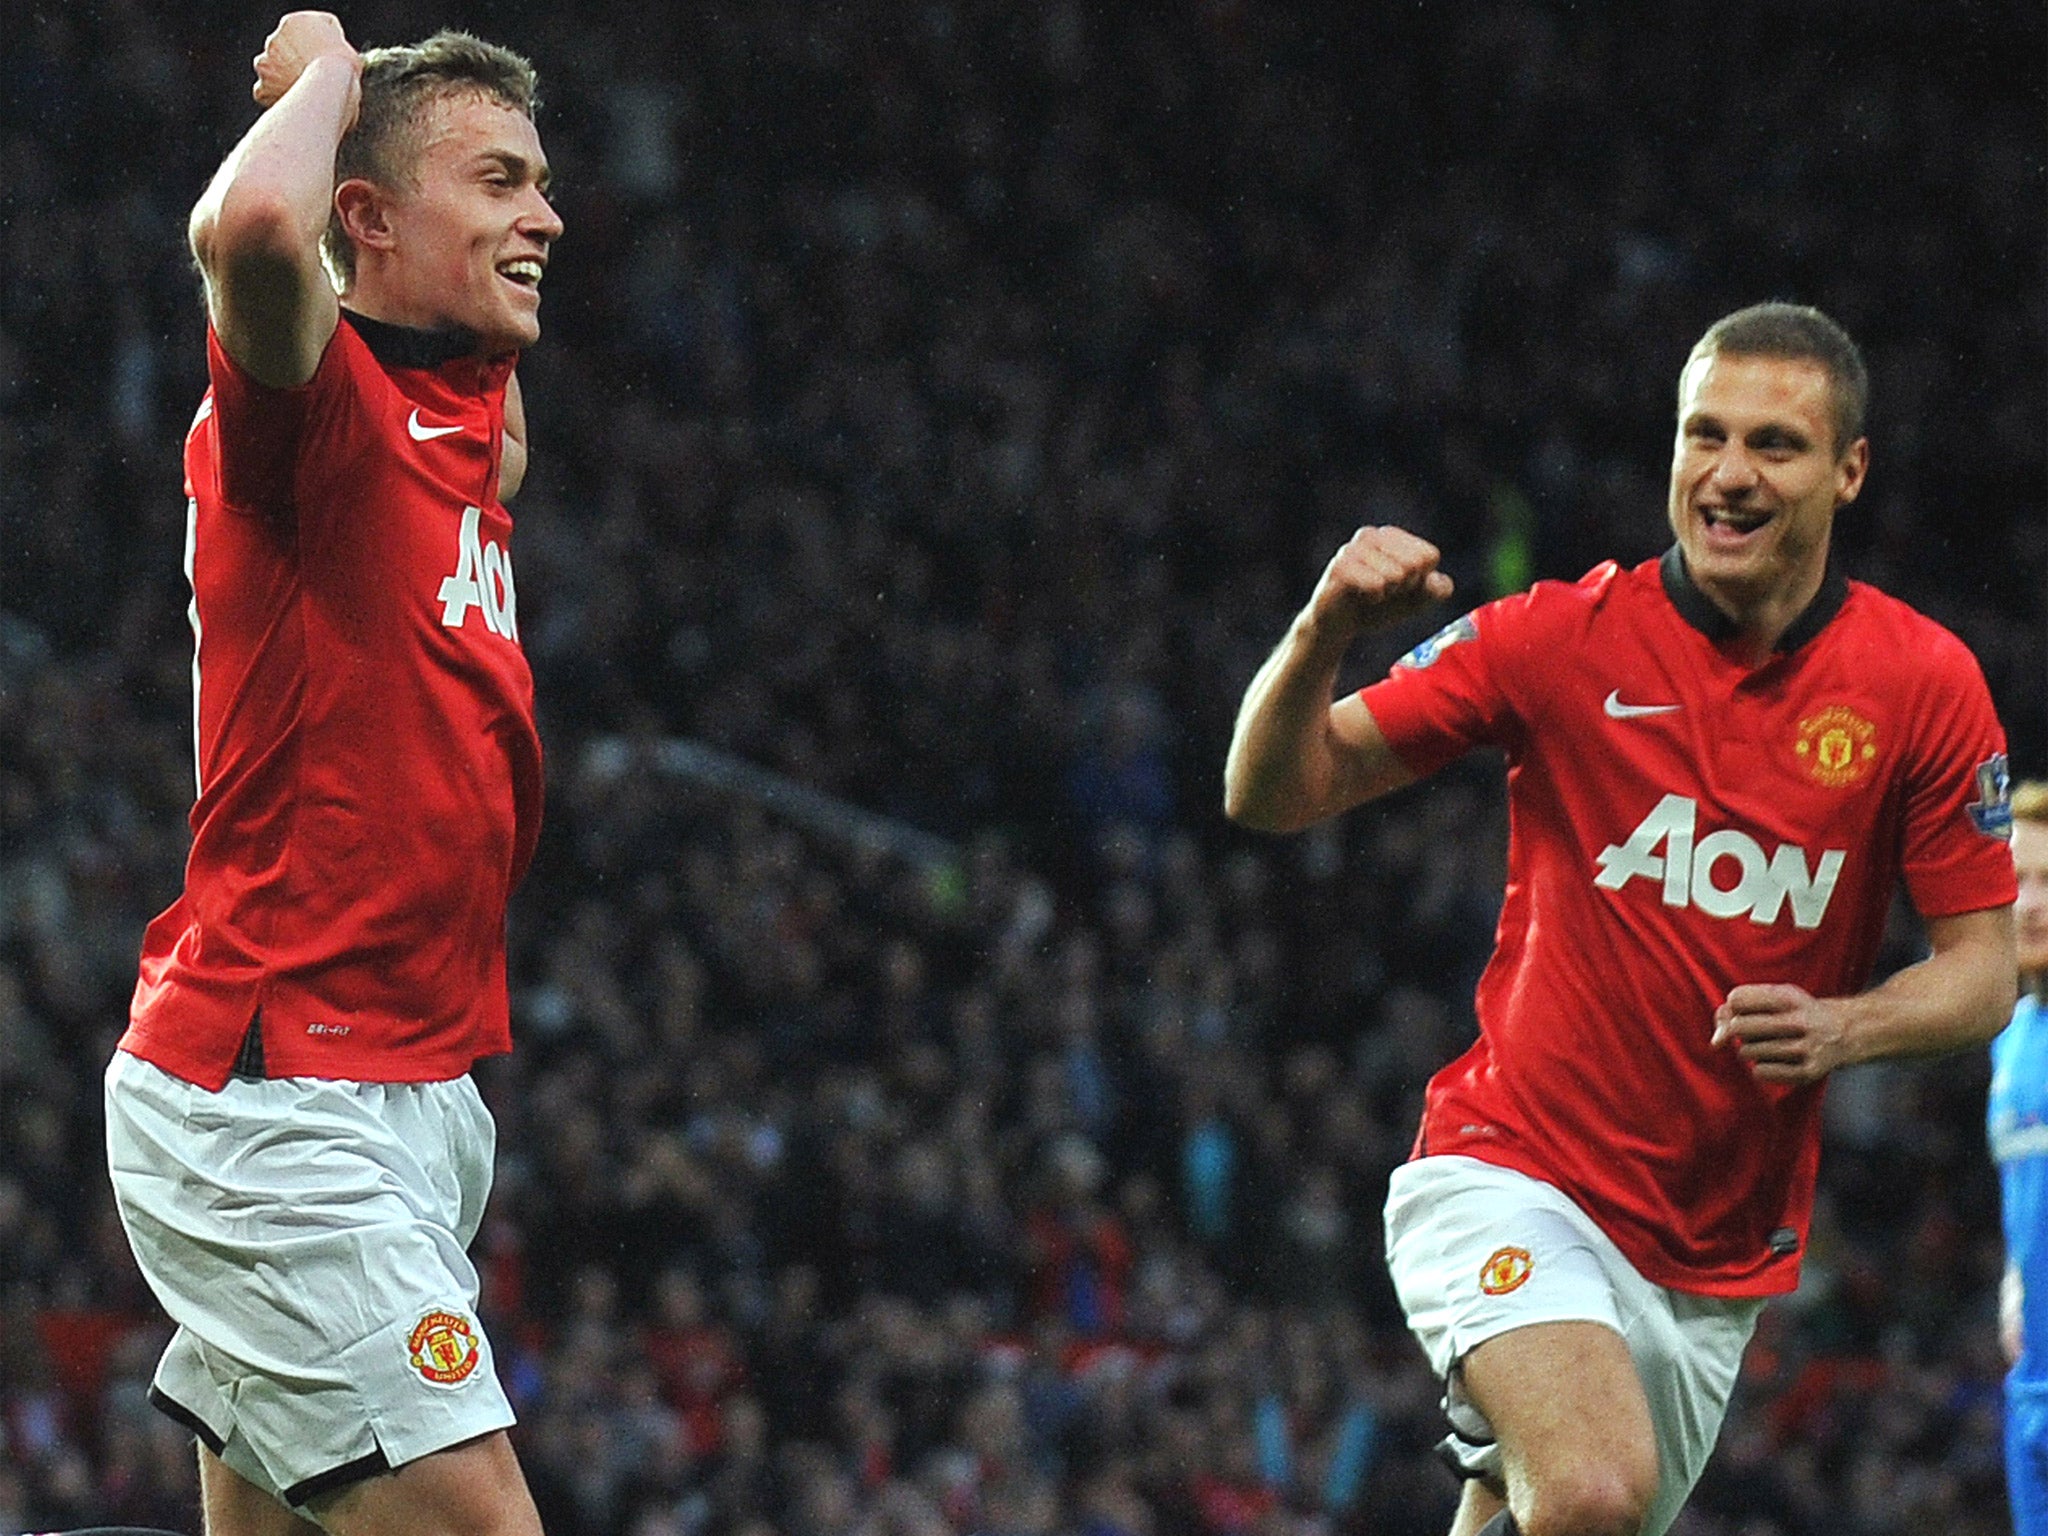 James Wilson celebrates with Nemanja Vidic, who was making his last appearance at Old Trafford for United